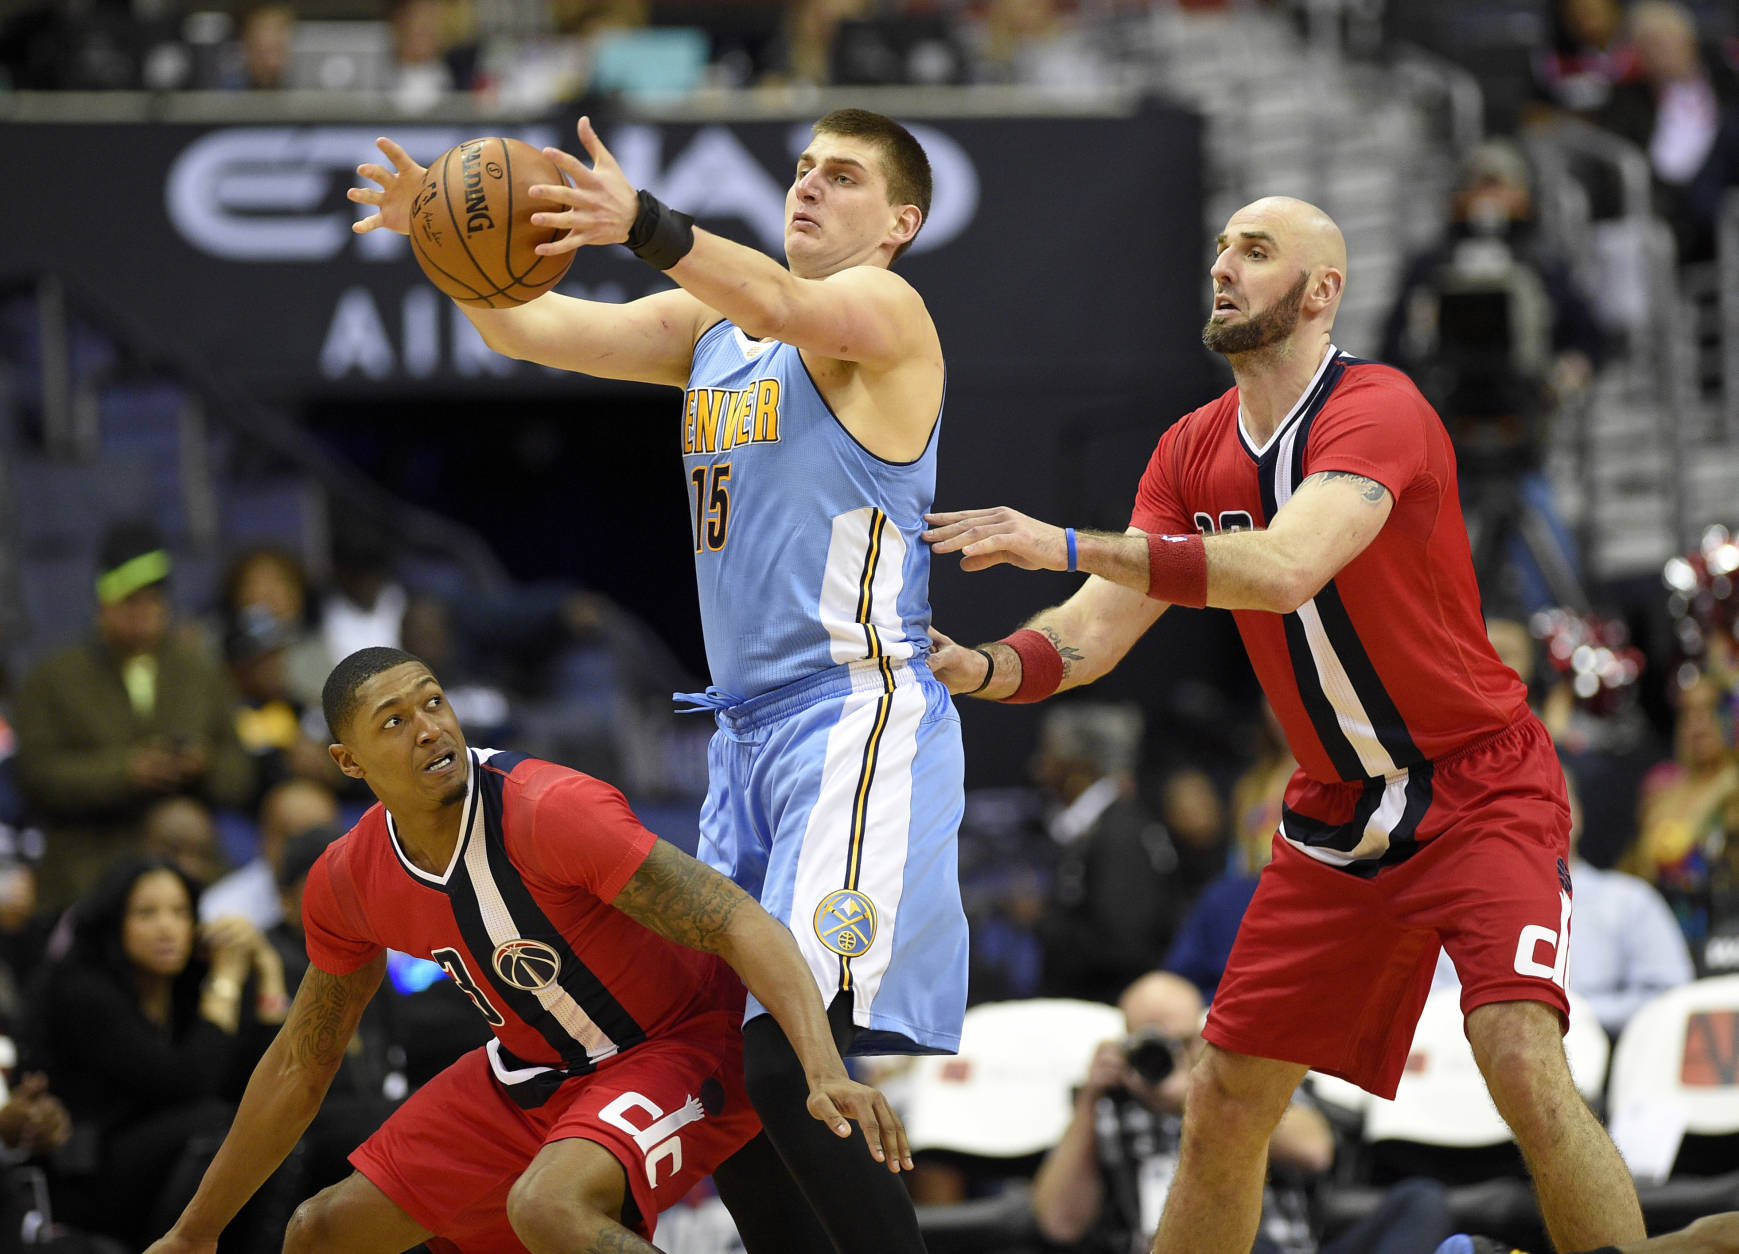 Denver Nuggets forward Nikola Jokic, of Serbia, (15) grabs the ball against Washington Wizards center Marcin Gortat, of Poland, right, and guard Bradley Beal, lower left, during the second half of an NBA basketball game, Thursday, Dec. 8, 2016, in Washington. The Wizards won 92-85. (AP Photo/Nick Wass)